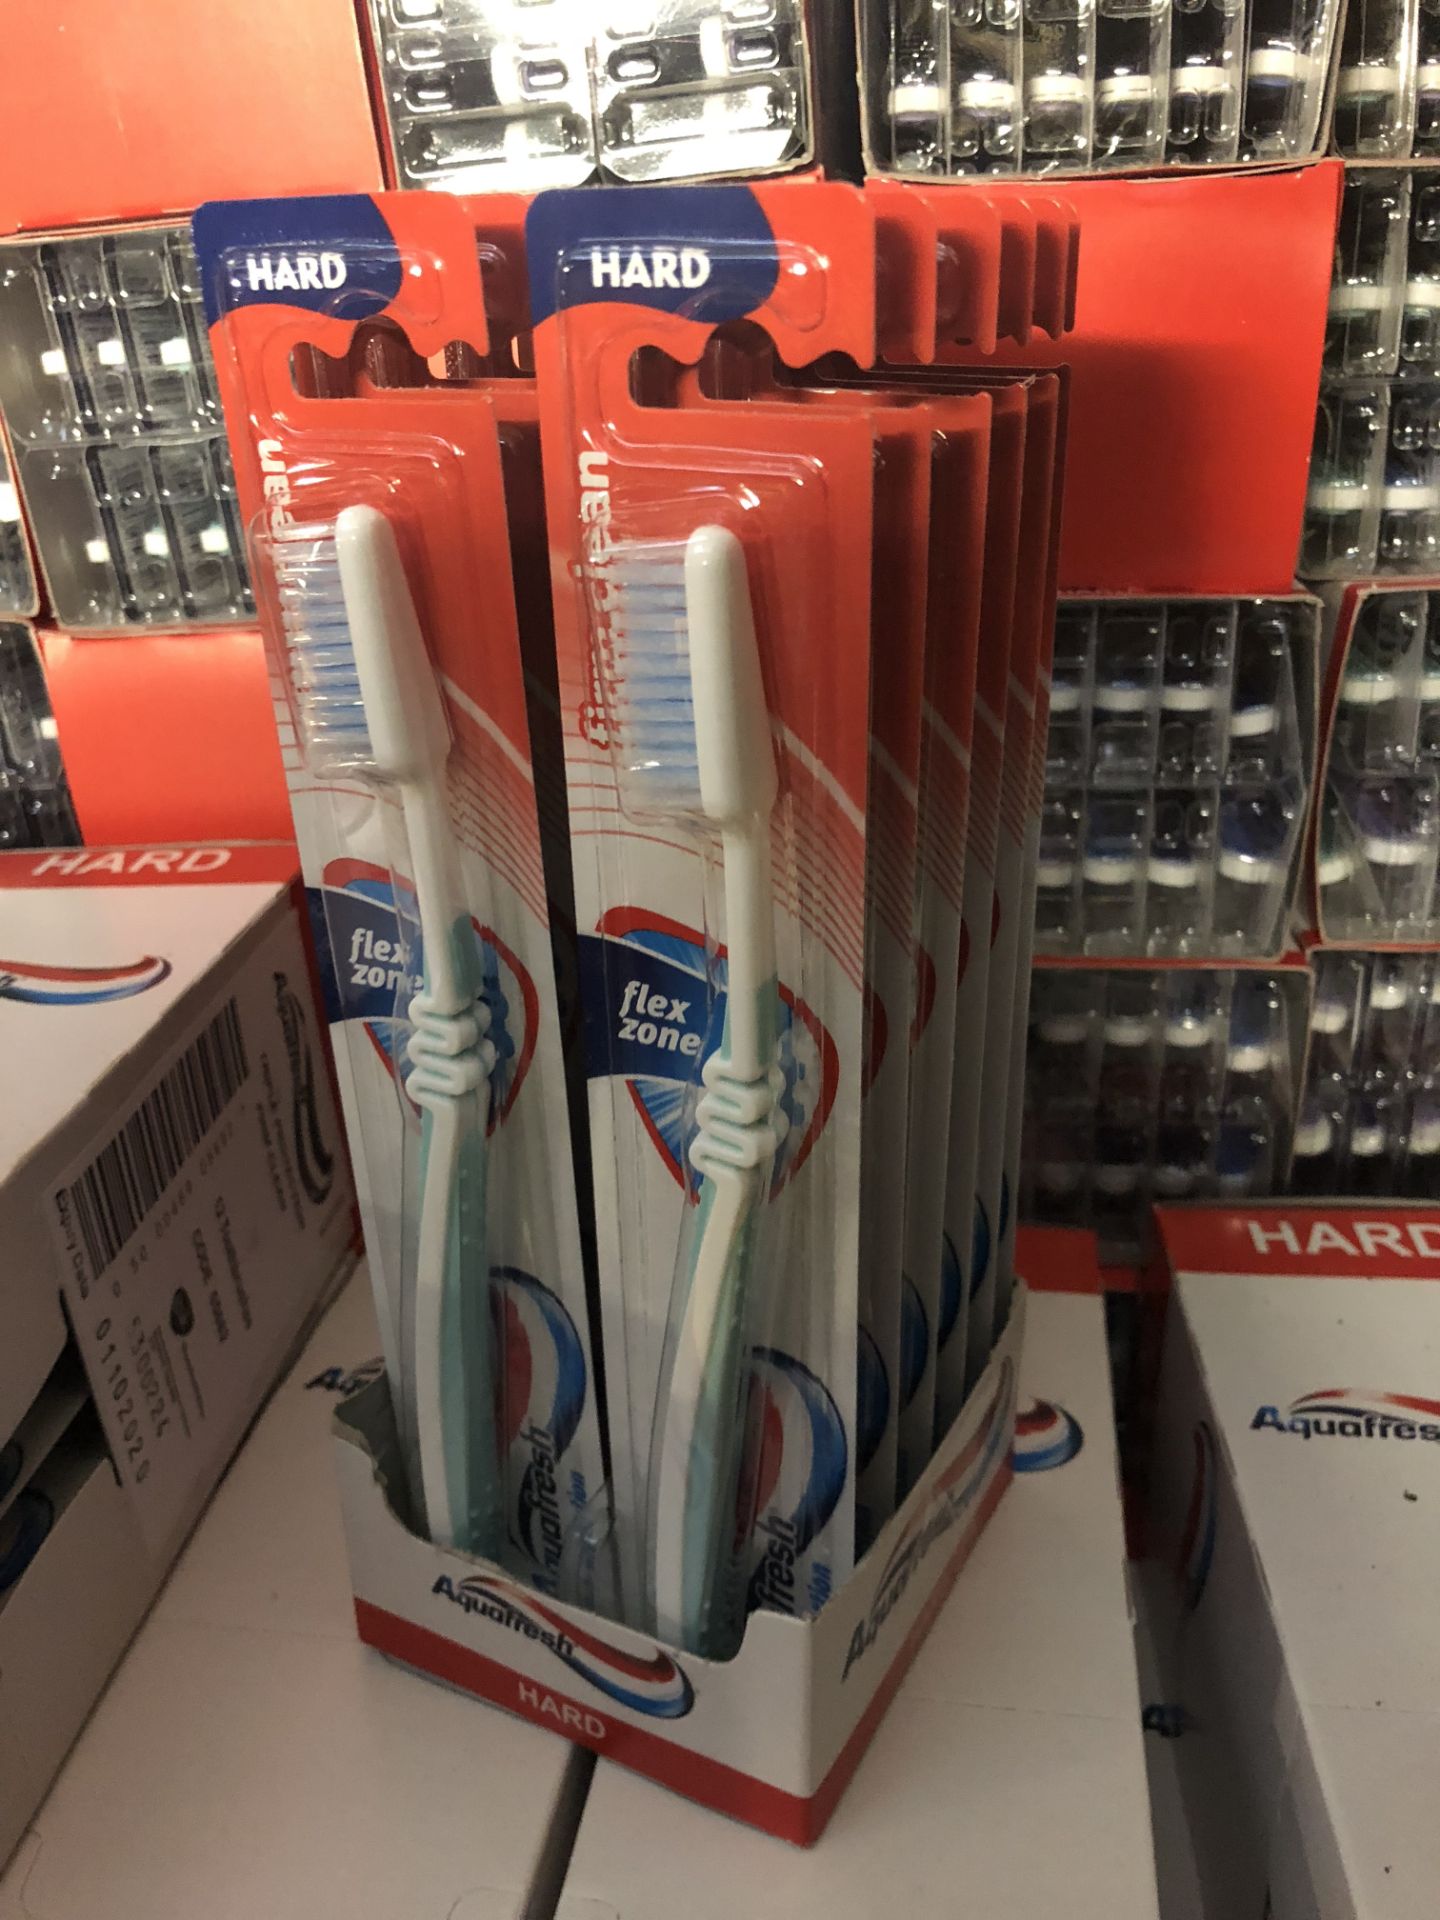 V Brand New 12 x Aquafresh Activate Triple Protection Toothbrush Firm Clean - Image 2 of 3